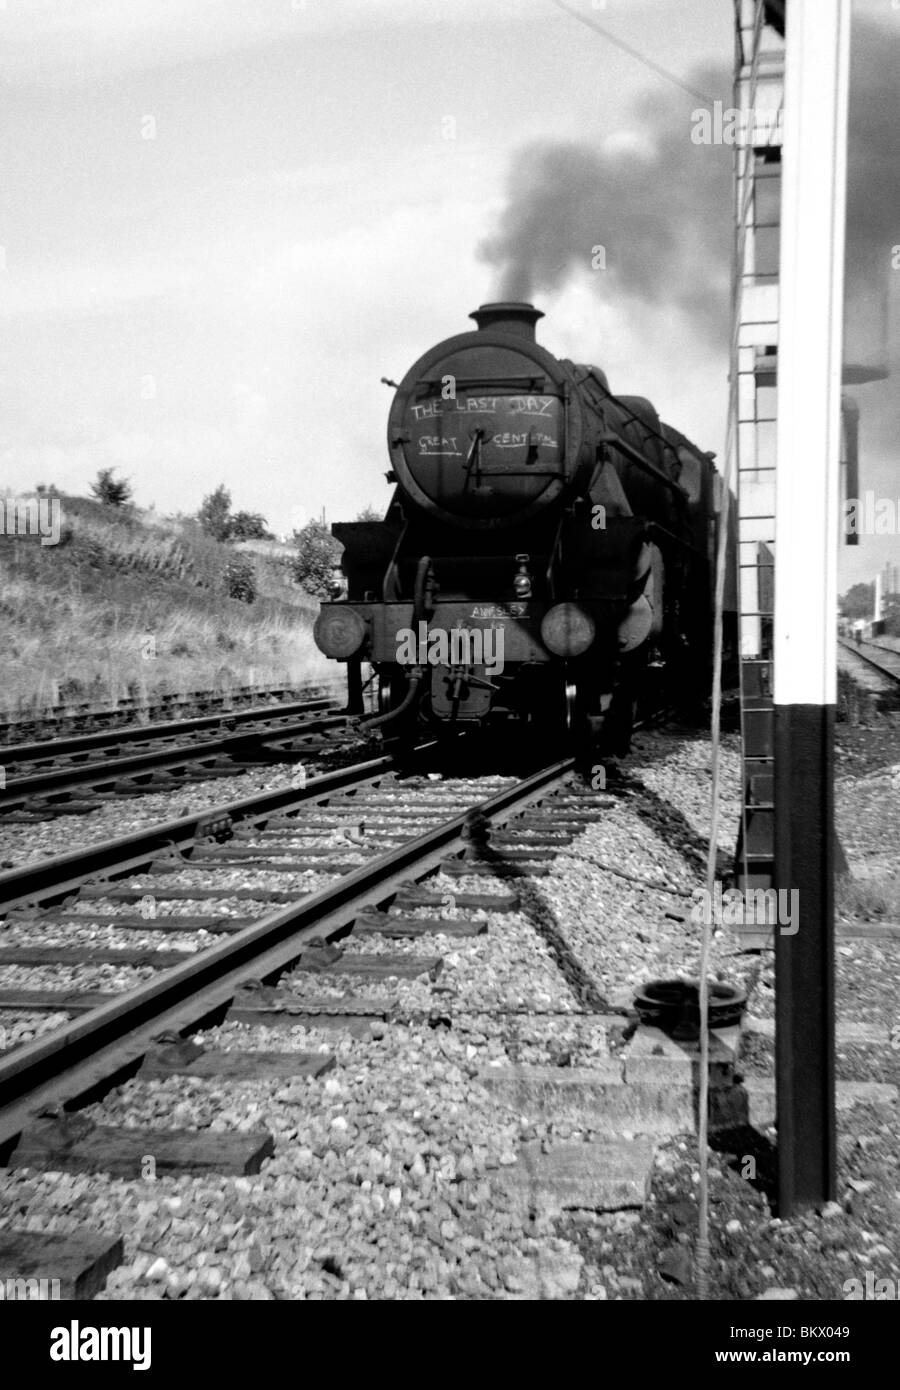 unknown locomotive with the last day of the great central railway chalked on the front Stock Photo